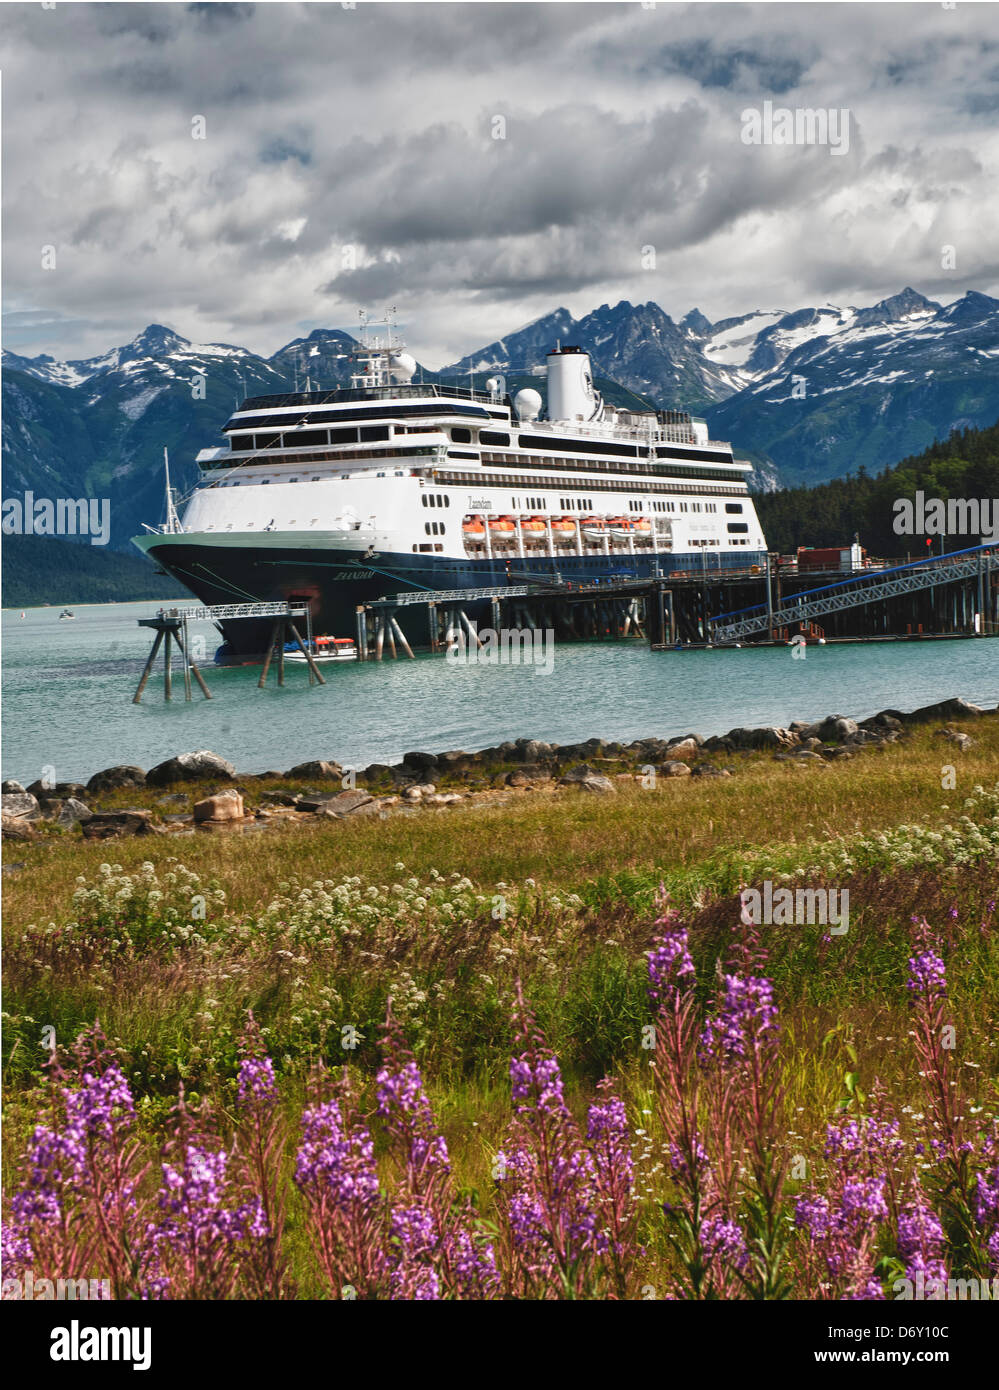 The cruise ship dock with a Holland America ship docked in Haines Alaska Stock Photo